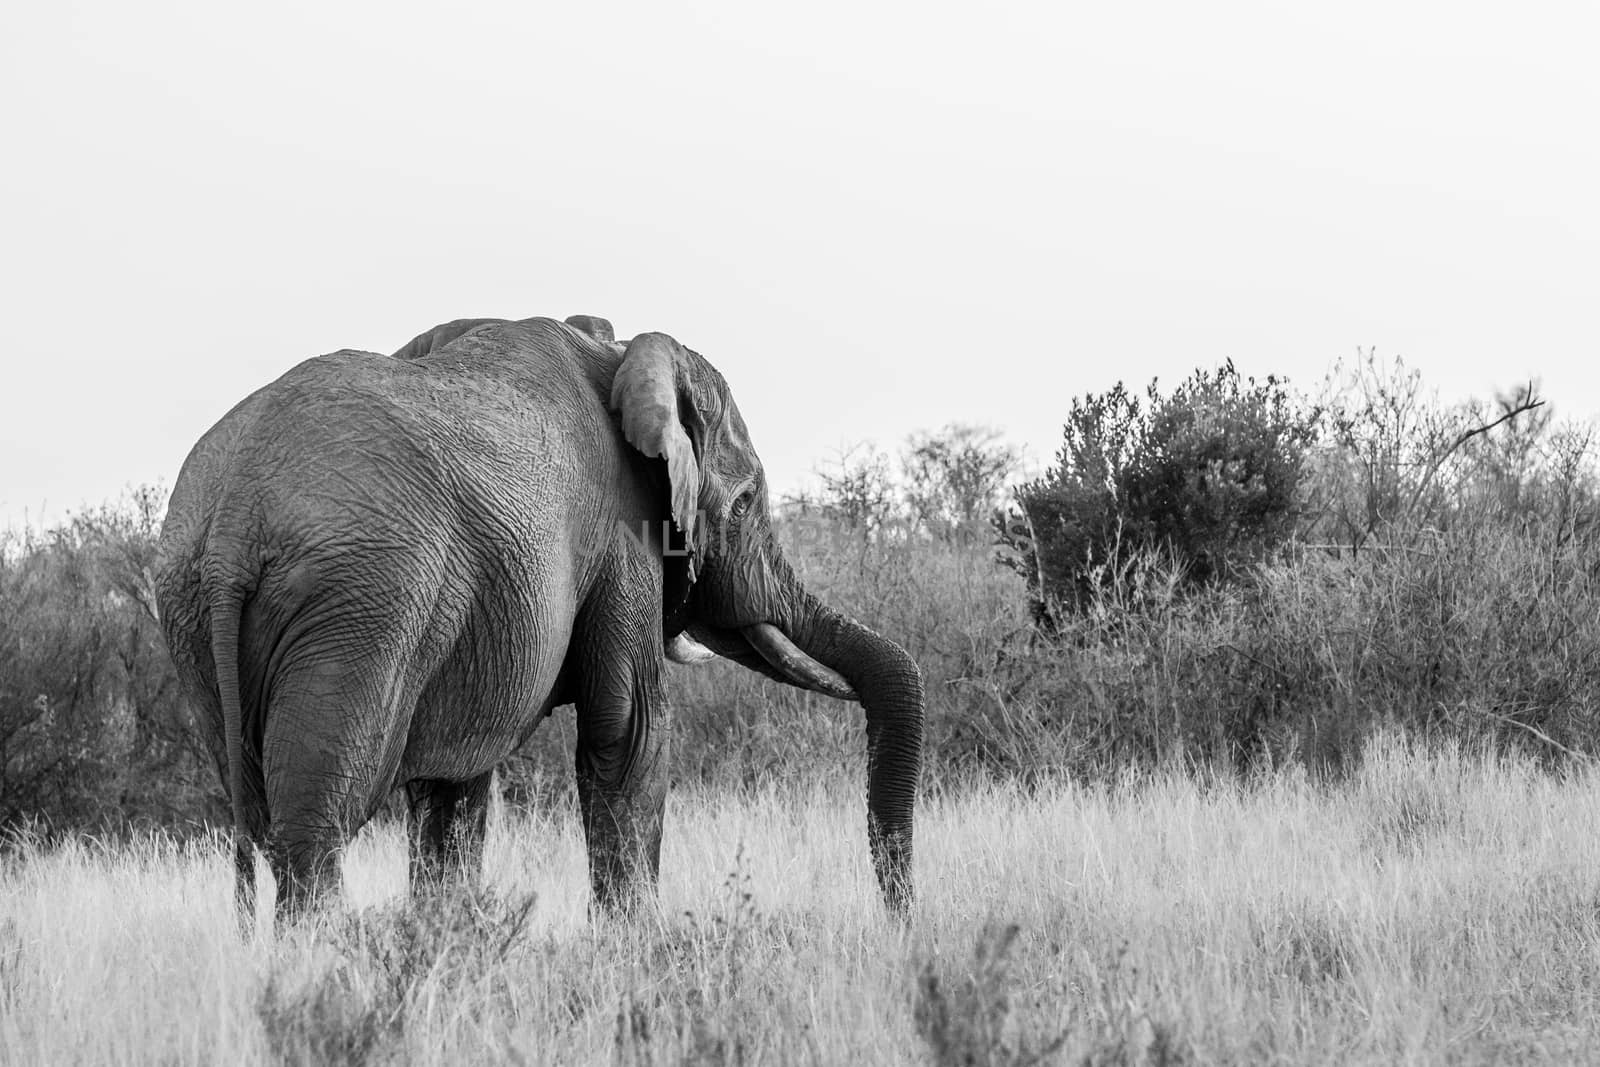 Big Elephant bull facing away from the camera. by Simoneemanphotography